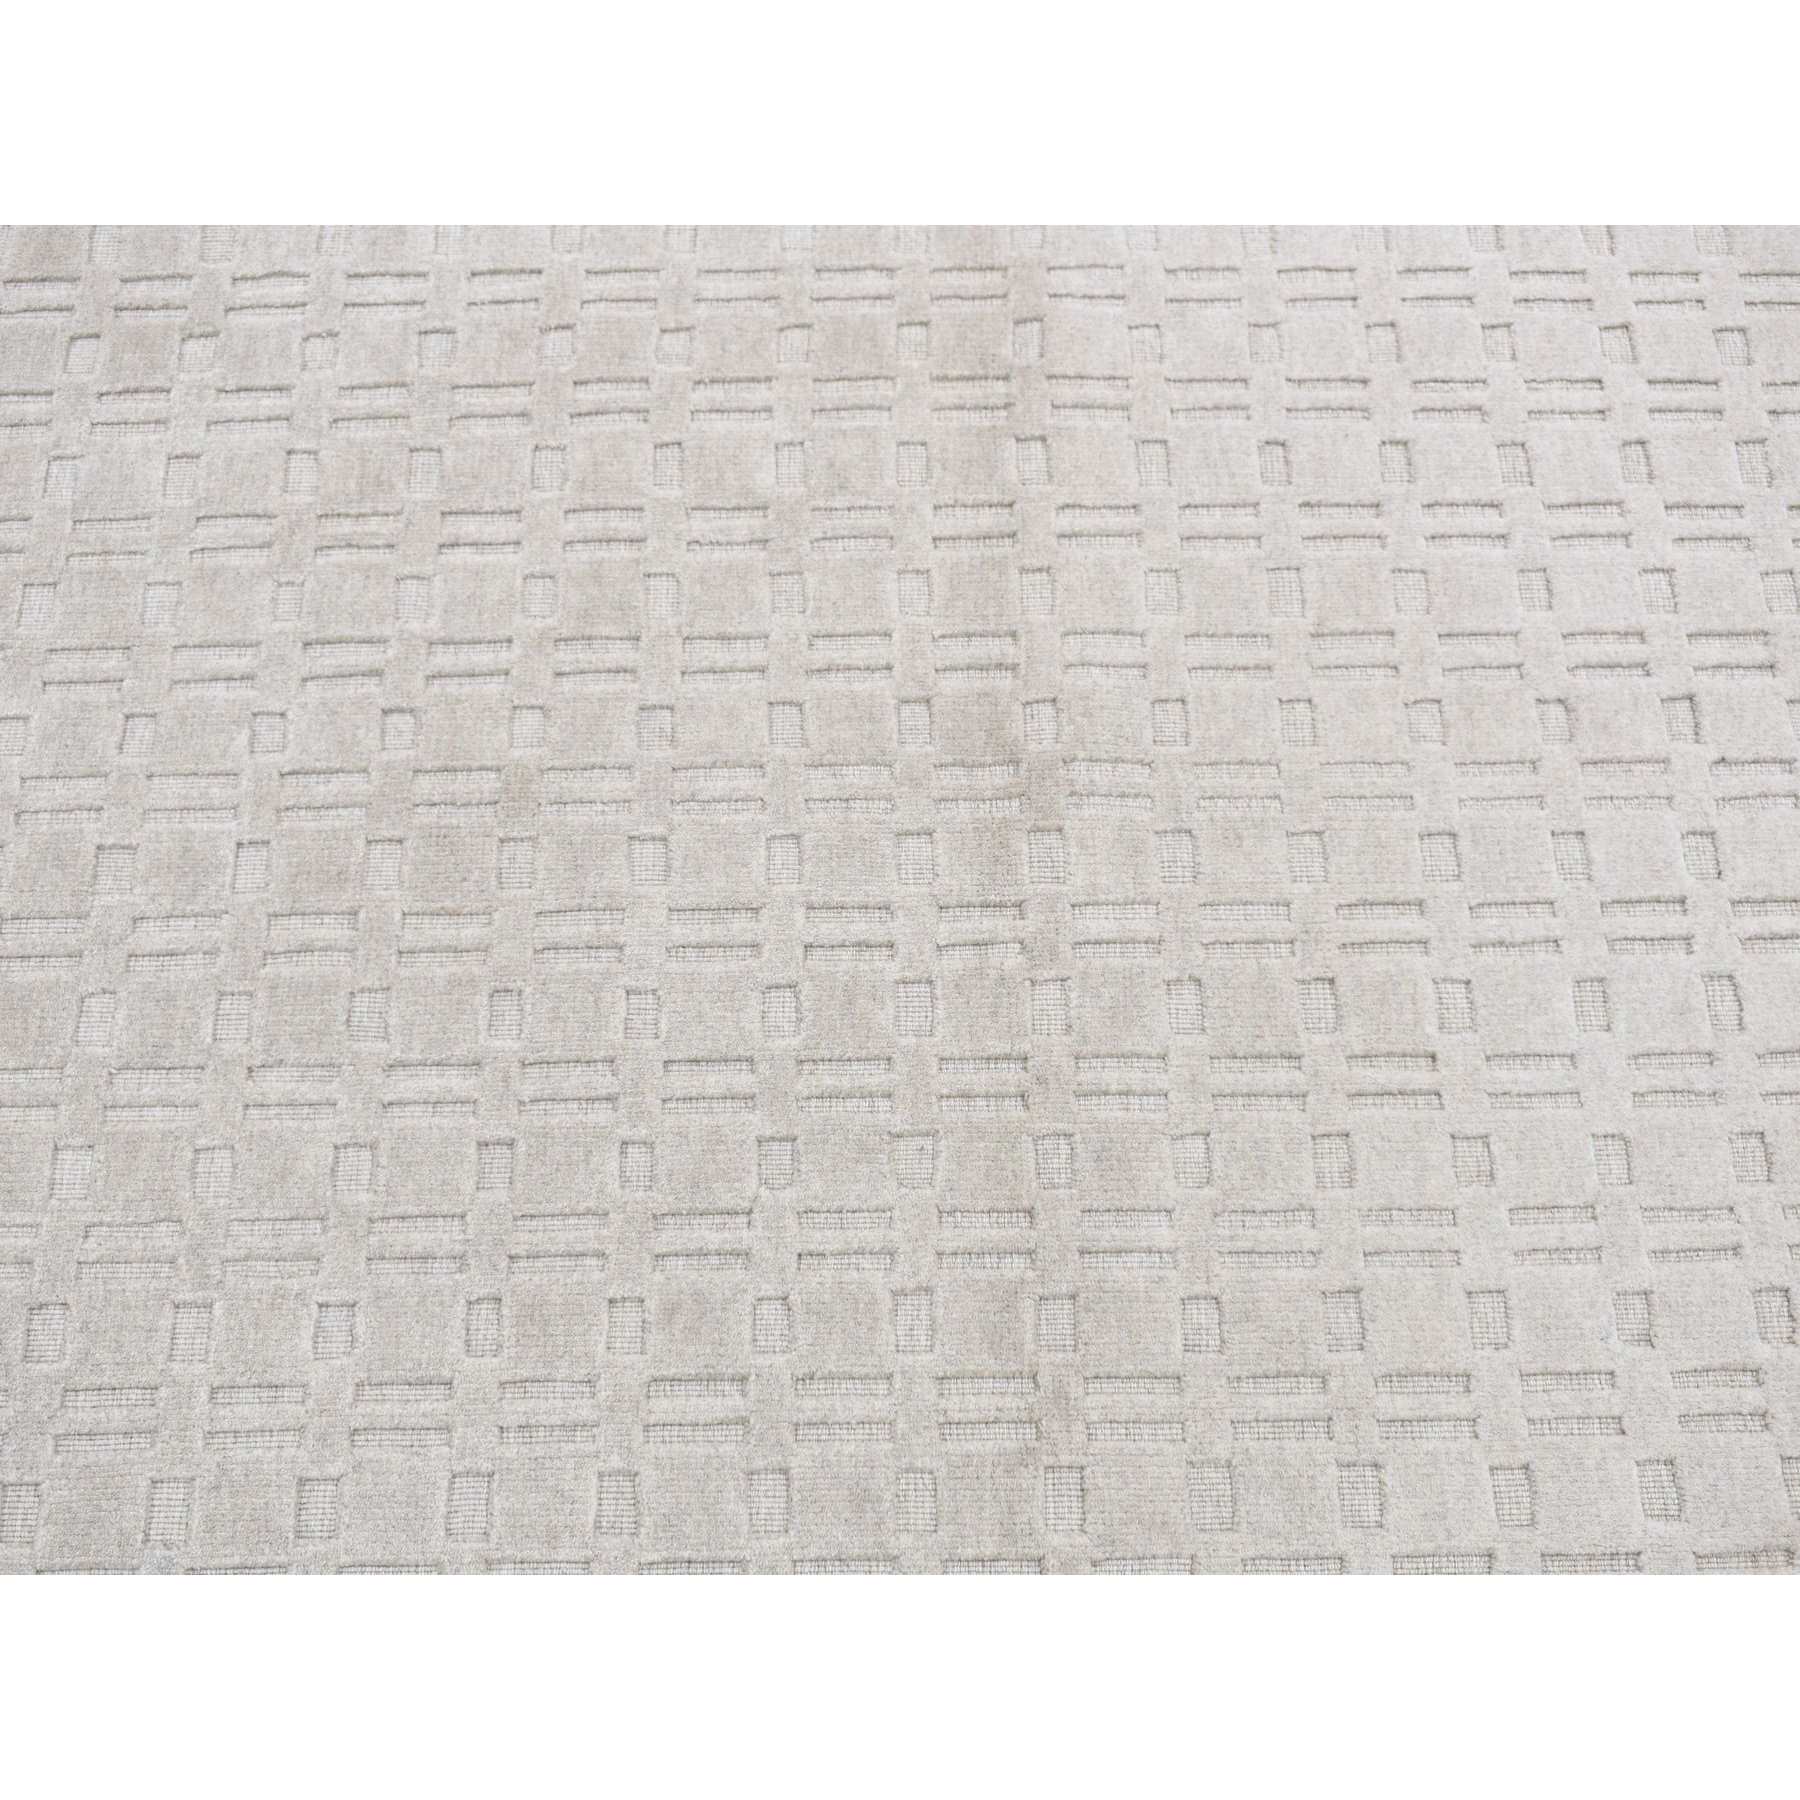 Modern-and-Contemporary-Hand-Loomed-Rug-435795